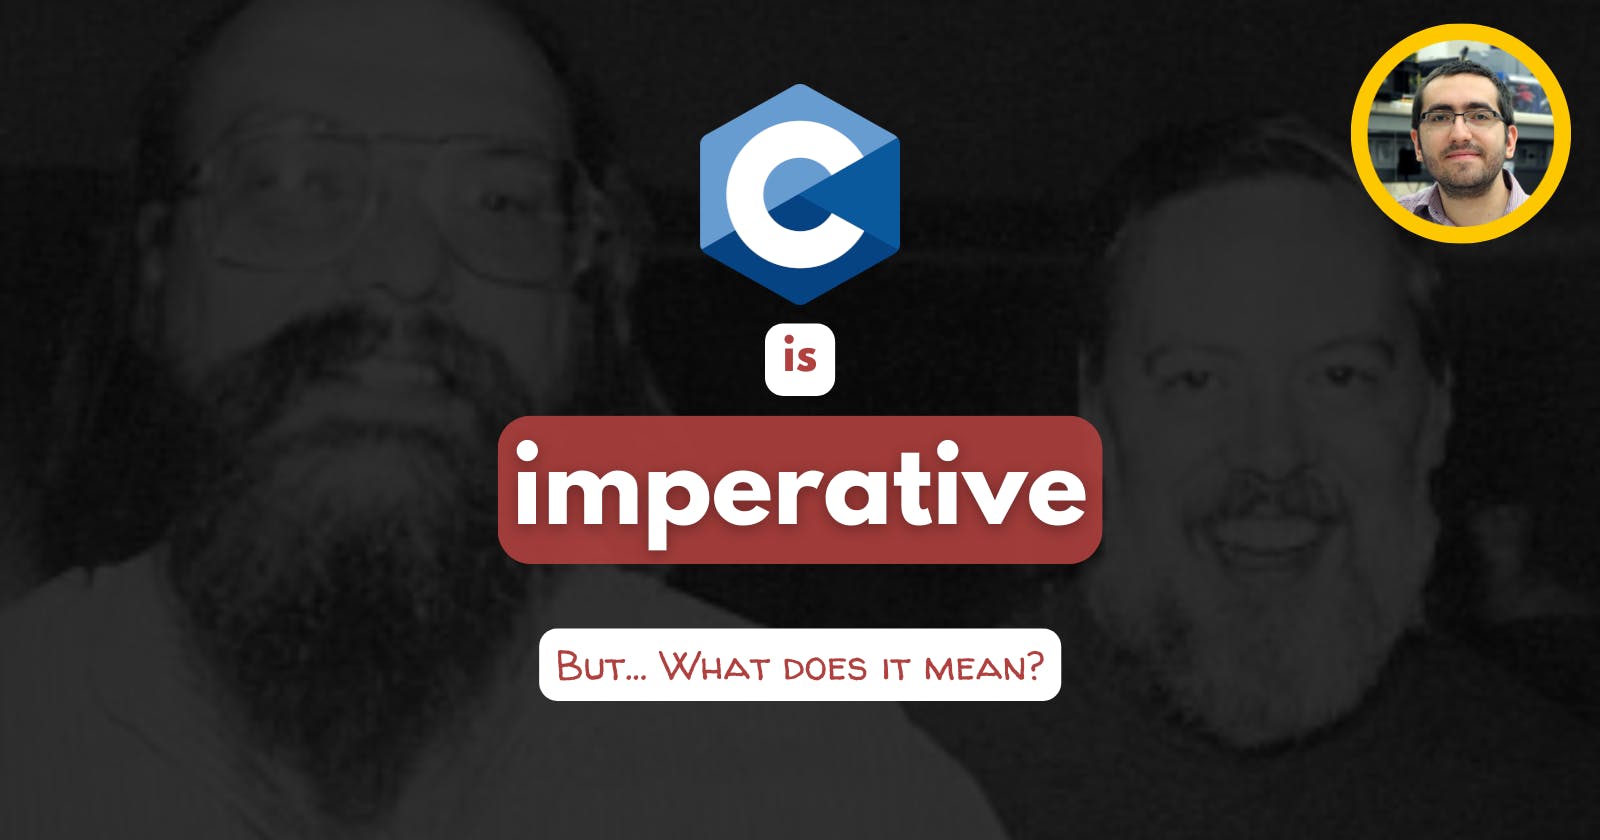 C is an imperative language.